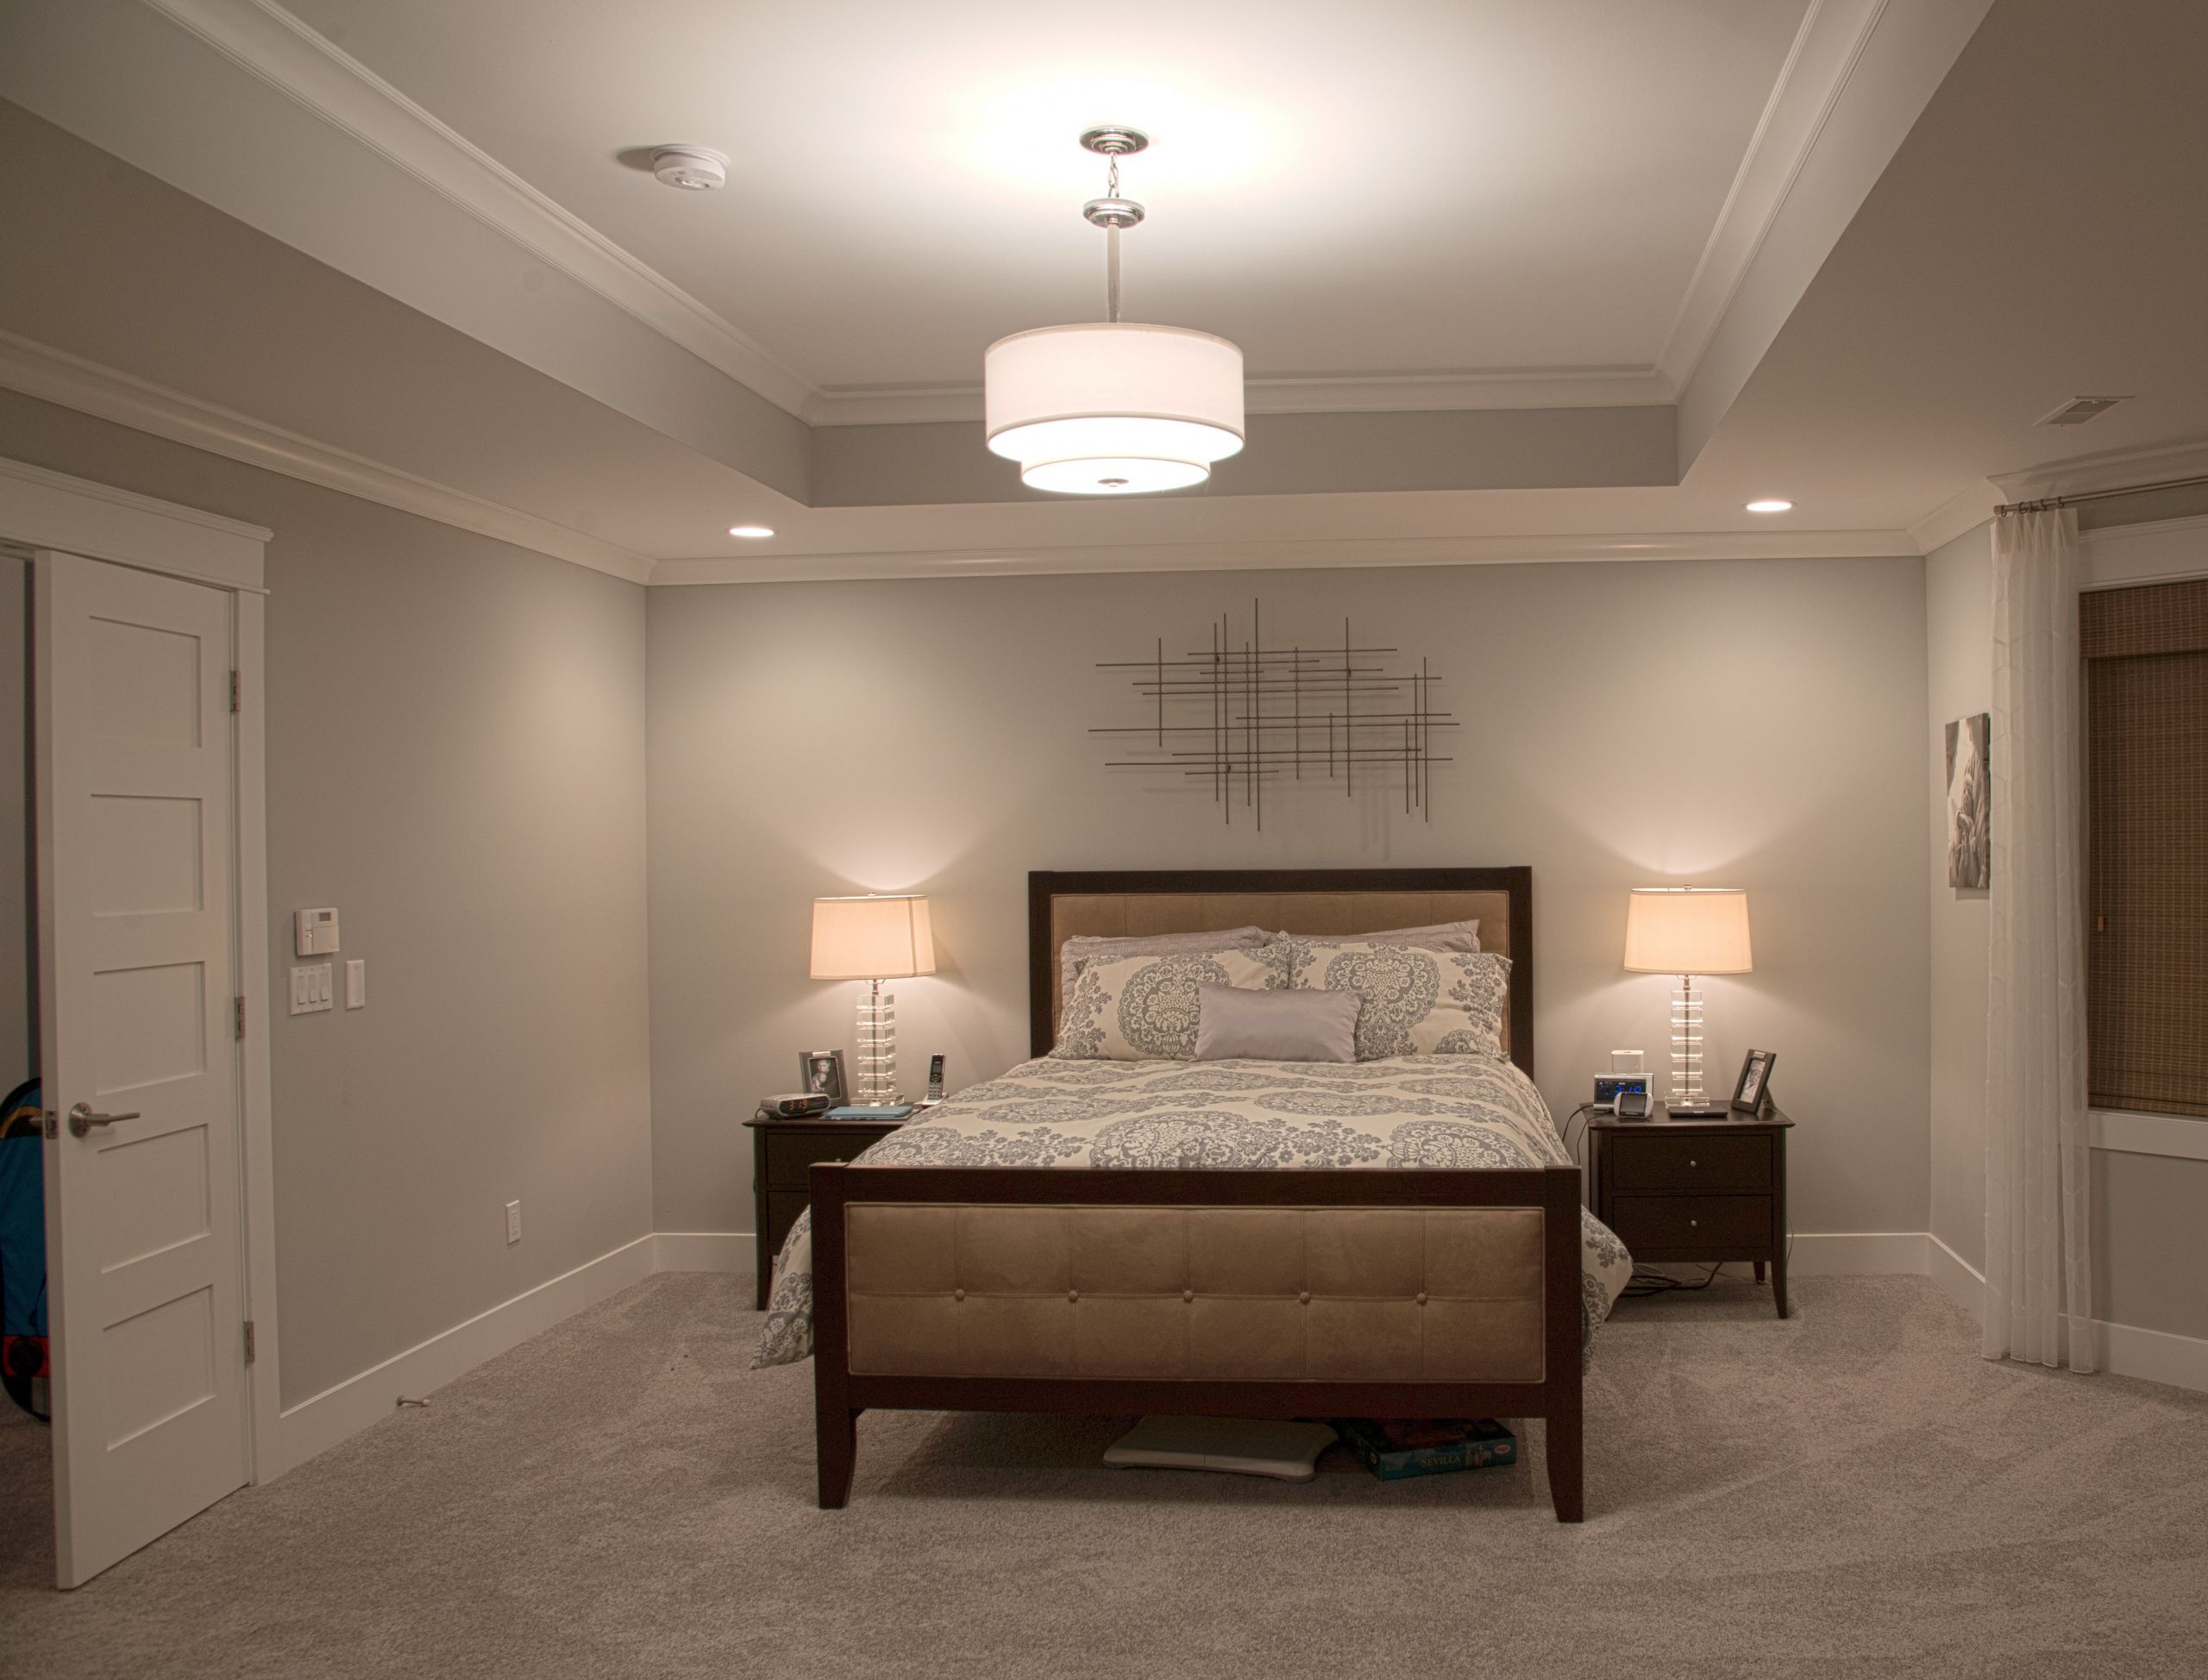 Bedroom Ceiling Lights
 What s Your Design Style Gross Electric